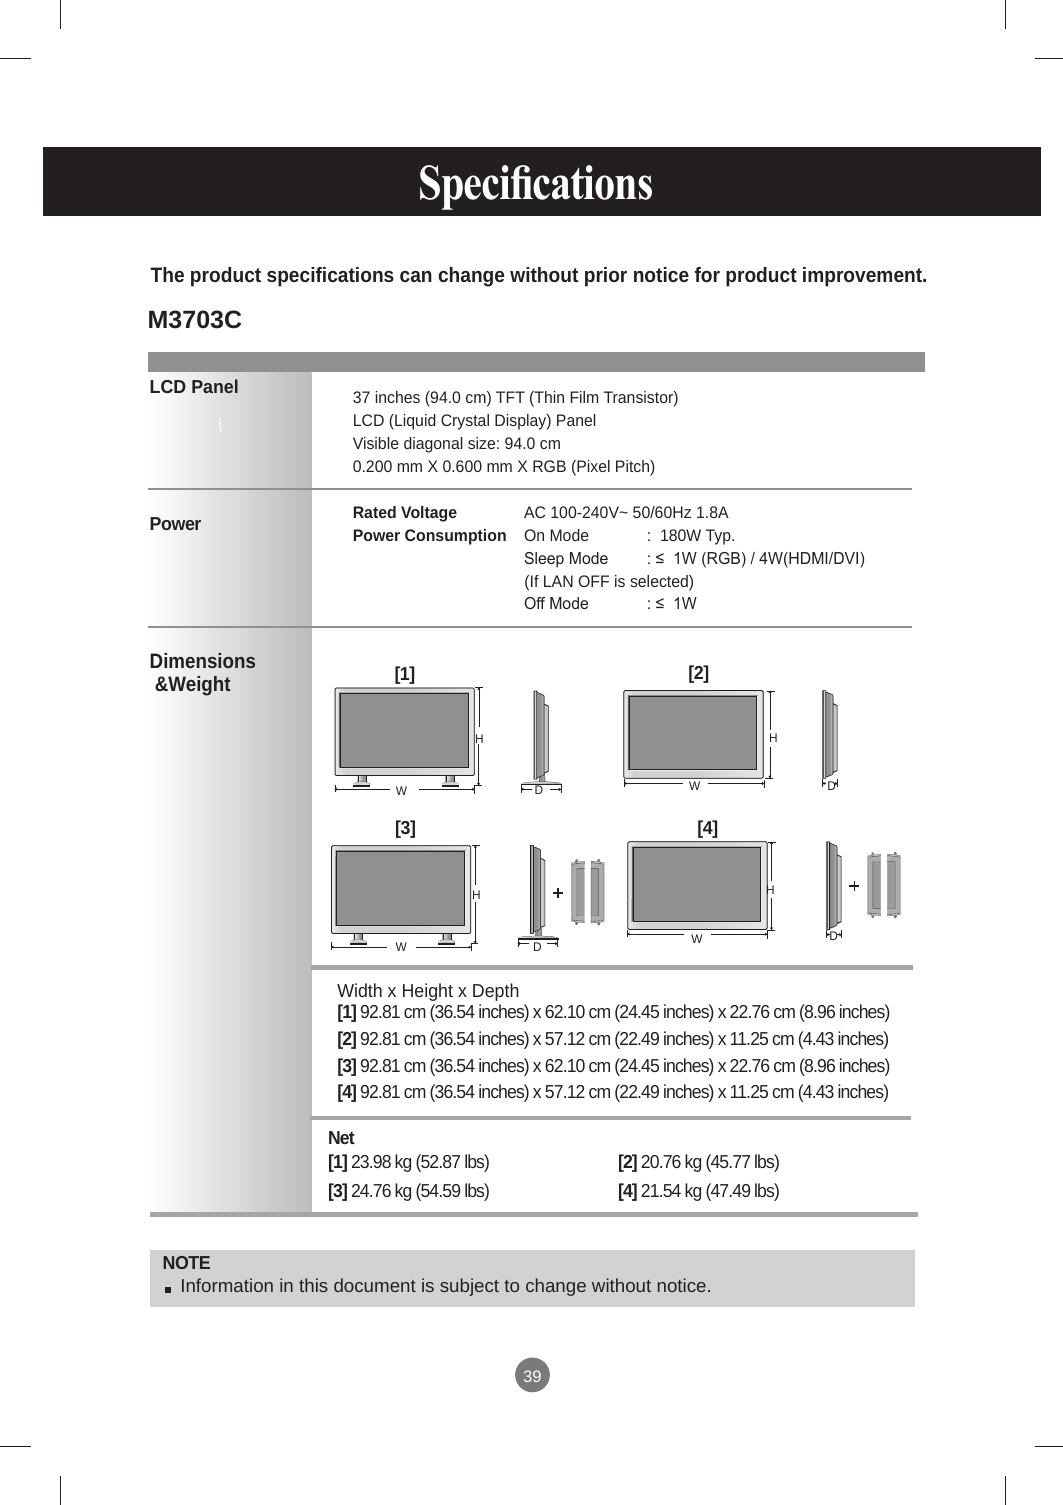 39 Specications  LCD PanelPower Dimensions &amp;WeightNOTE Information in this document is subject to change without notice.37 inches (94.0 cm) TFT (Thin Film Transistor)LCD (Liquid Crystal Display) PanelVisible diagonal size: 94.0 cm0.200 mm X 0.600 mm X RGB (Pixel Pitch)Rated Voltage   AC 100-240V~ 50/60Hz 1.8APower Consumption  On Mode  :  180W Typ.   Sleep Mode  : ≤  1W (RGB) / 4W(HDMI/DVI)                                       (If LAN OFF is selected)   Off Mode  : ≤  1W The product specifications can change without prior notice for product improvement.Width x Height x Depth  [1] 92.81 cm (36.54 inches) x 62.10 cm (24.45 inches) x 22.76 cm (8.96 inches)[2] 92.81 cm (36.54 inches) x 57.12 cm (22.49 inches) x 11.25 cm (4.43 inches)[3] 92.81 cm (36.54 inches) x 62.10 cm (24.45 inches) x 22.76 cm (8.96 inches)[4] 92.81 cm (36.54 inches) x 57.12 cm (22.49 inches) x 11.25 cm (4.43 inches)Net   [1] 23.98 kg (52.87 lbs)  [2] 20.76 kg (45.77 lbs)[3] 24.76 kg (54.59 lbs)  [4] 21.54 kg (47.49 lbs)[1] WH[2] WHDD[3] WHDD[4] WHM3703C